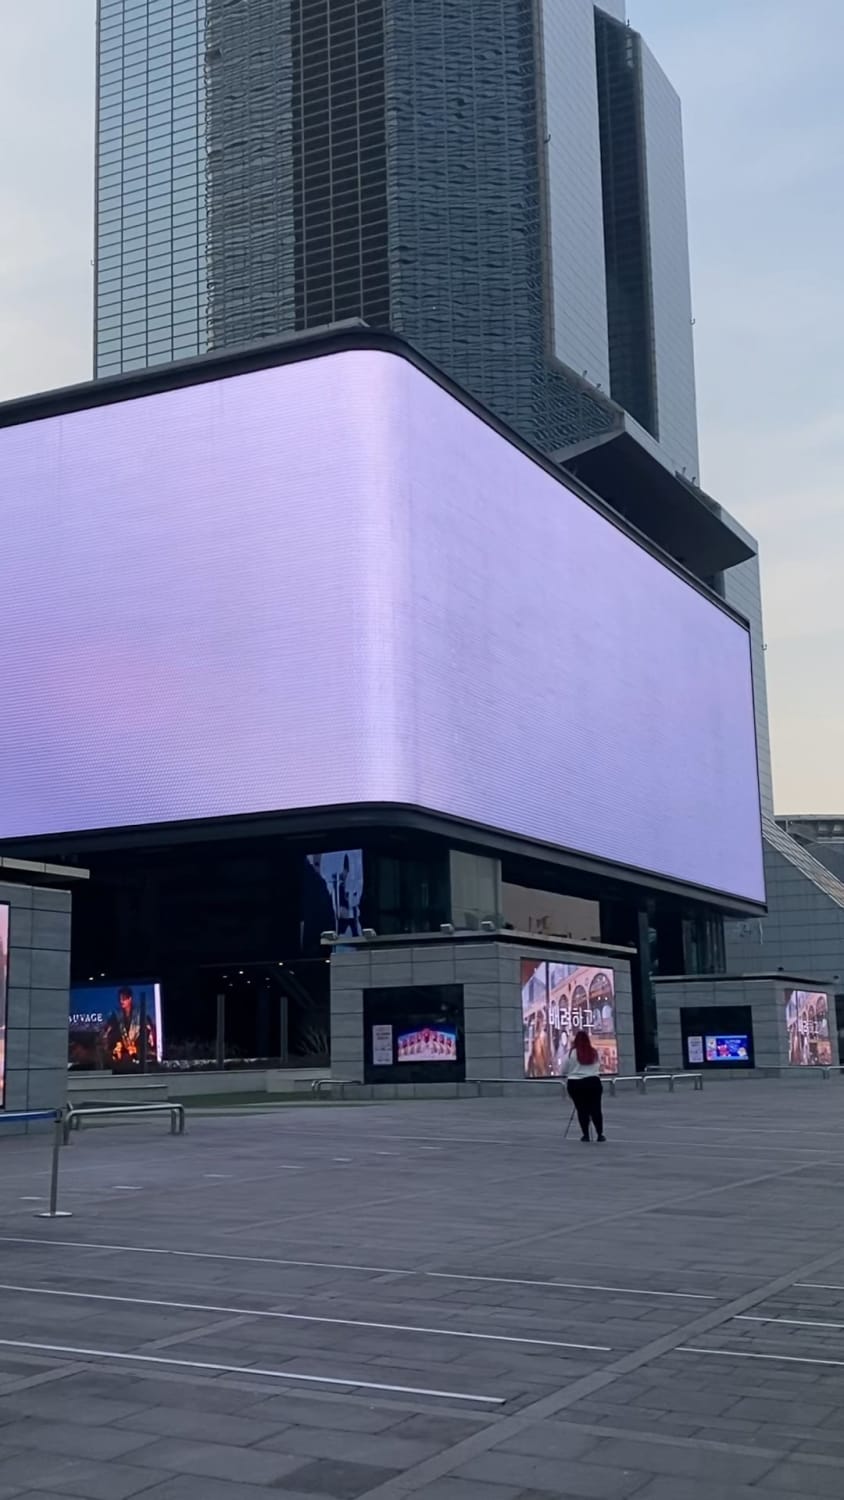 Found one of those “3D” curved LED billboards in Seoul, South Korea